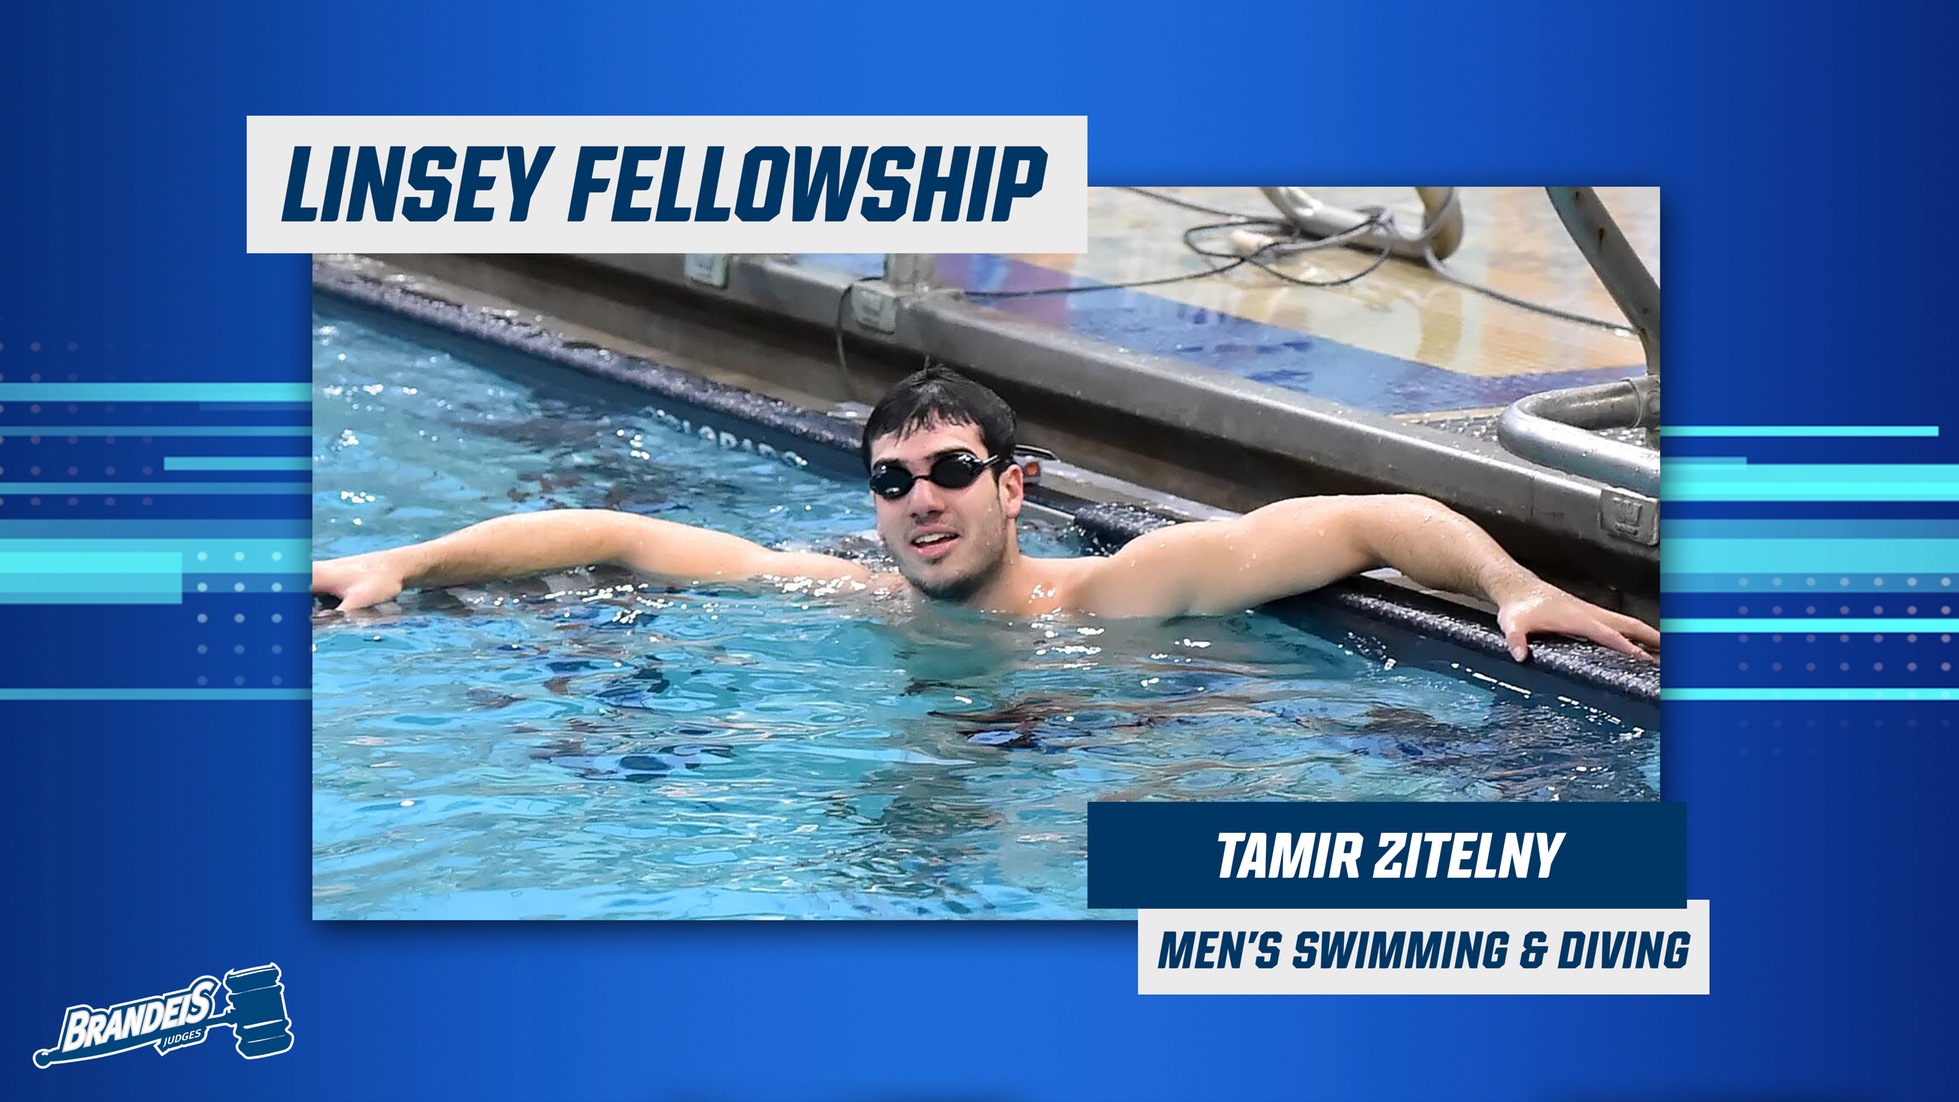 Linsey Fellowship Award Winner Tamir Zitelny at the end of a race holding on to the side of the pool